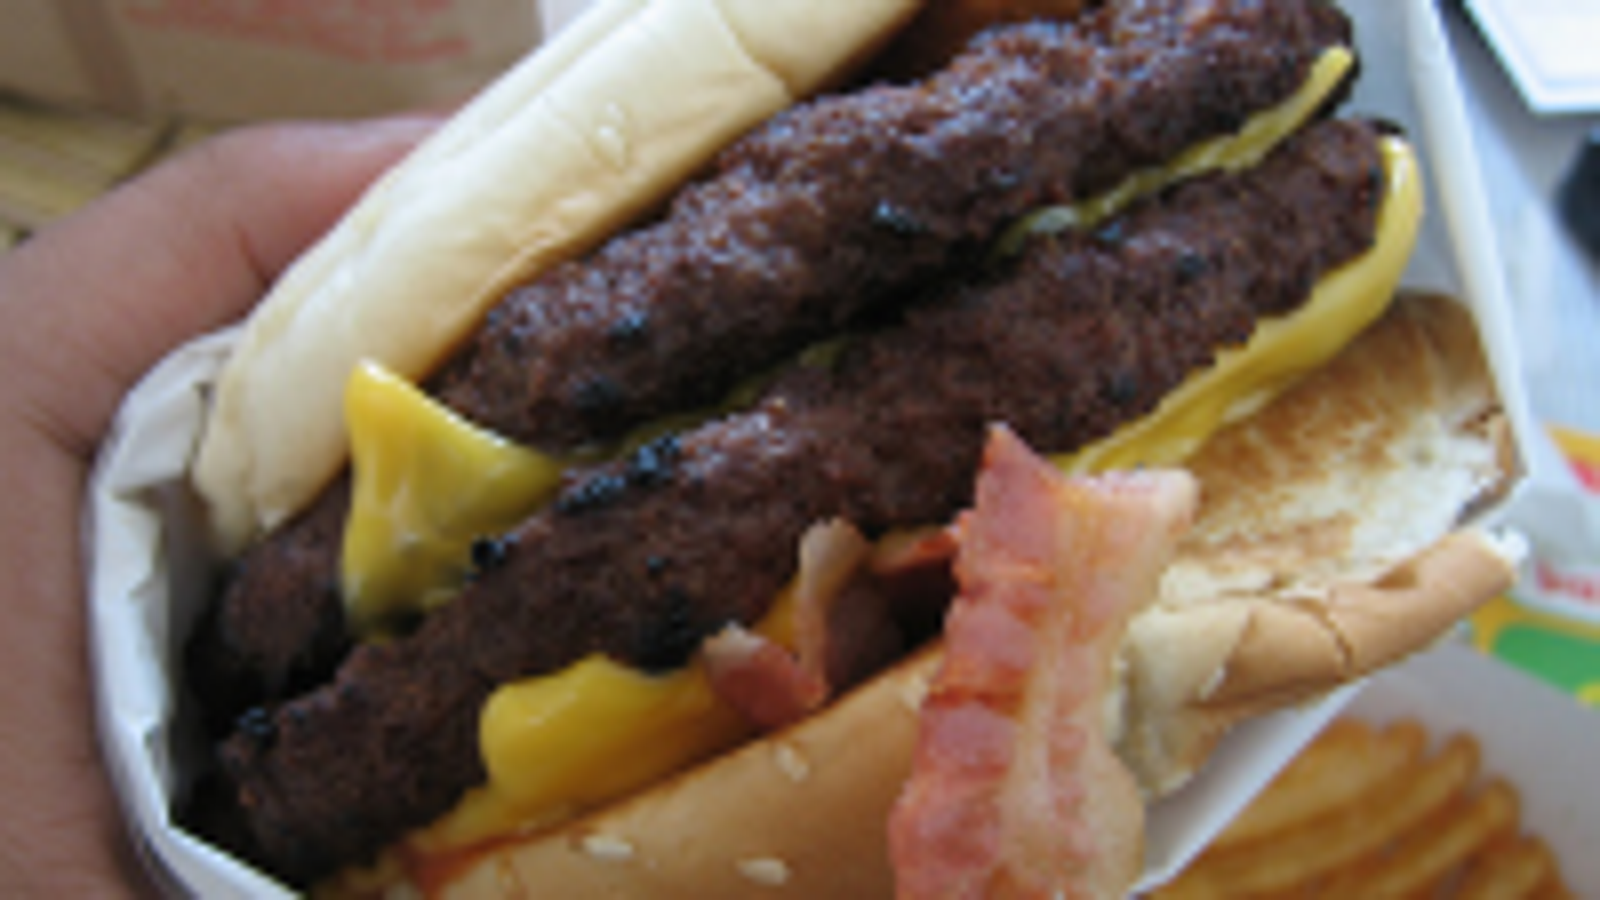 The Top Five Cheapest—But Least Healthy—Fast Food Choices